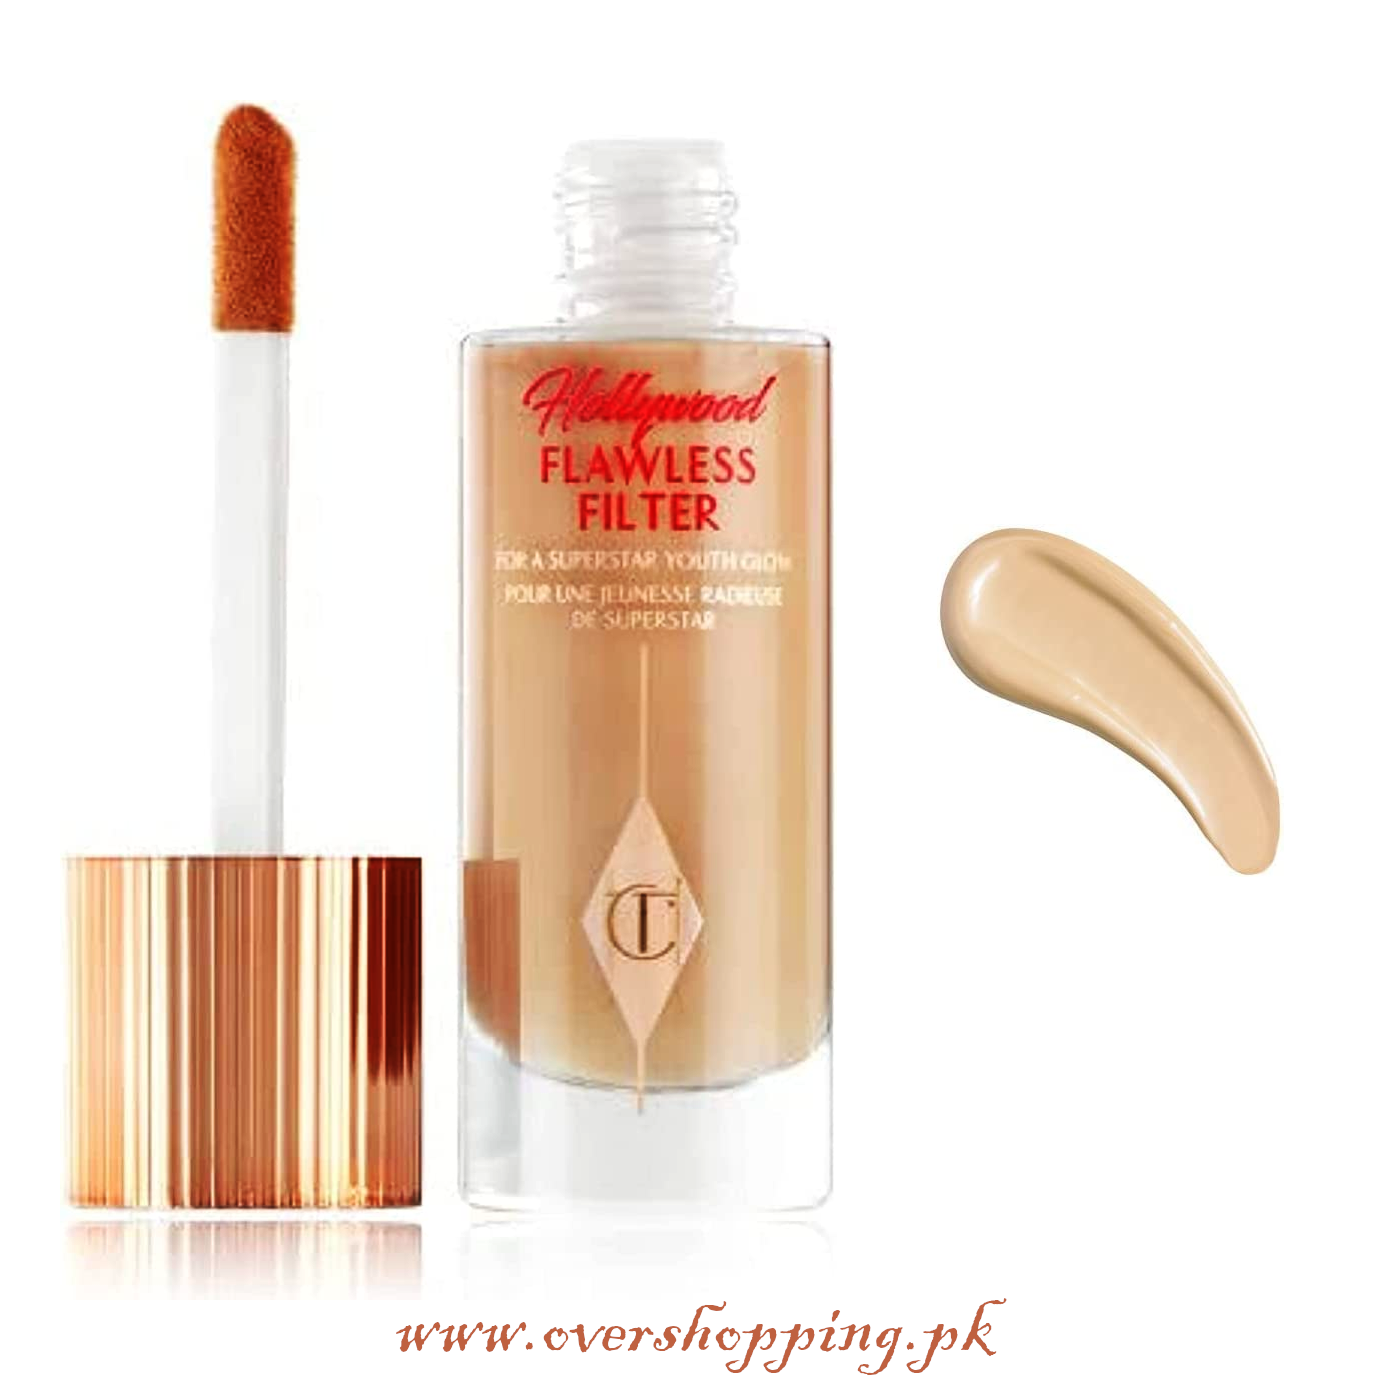 Charlotte Tilbury Hollywood Flawless Filter for a Superstar Youth Glow Foundation, 4 Medium, Beige